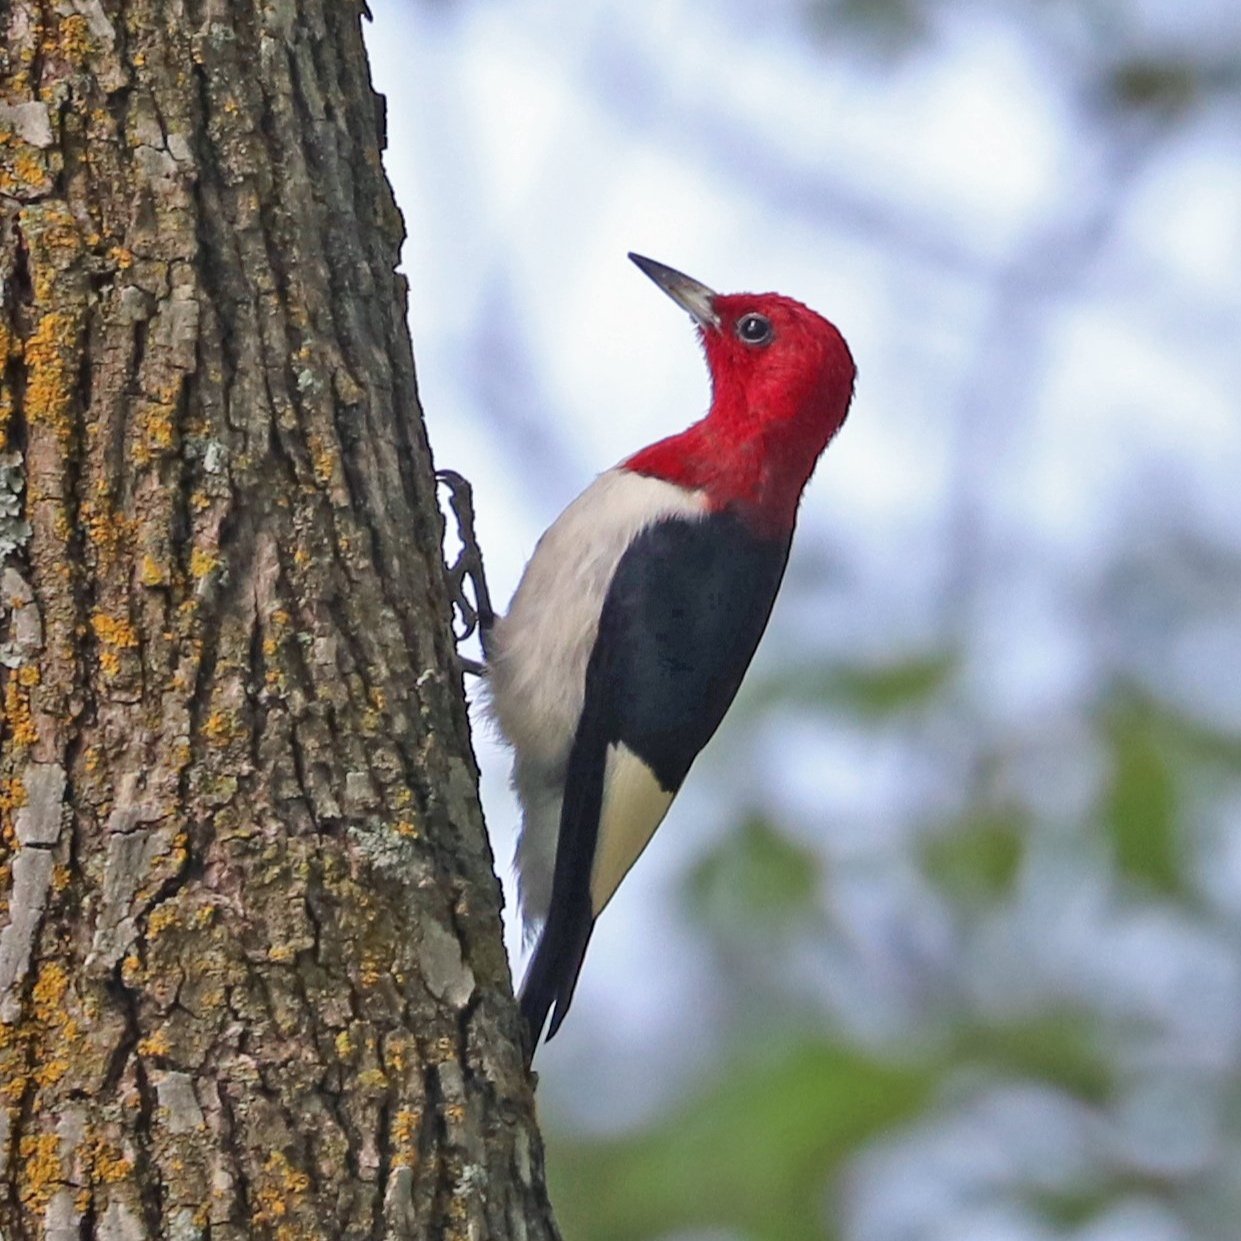 Wildlife Watching Wednesday: The Red-Headed Woodpecker